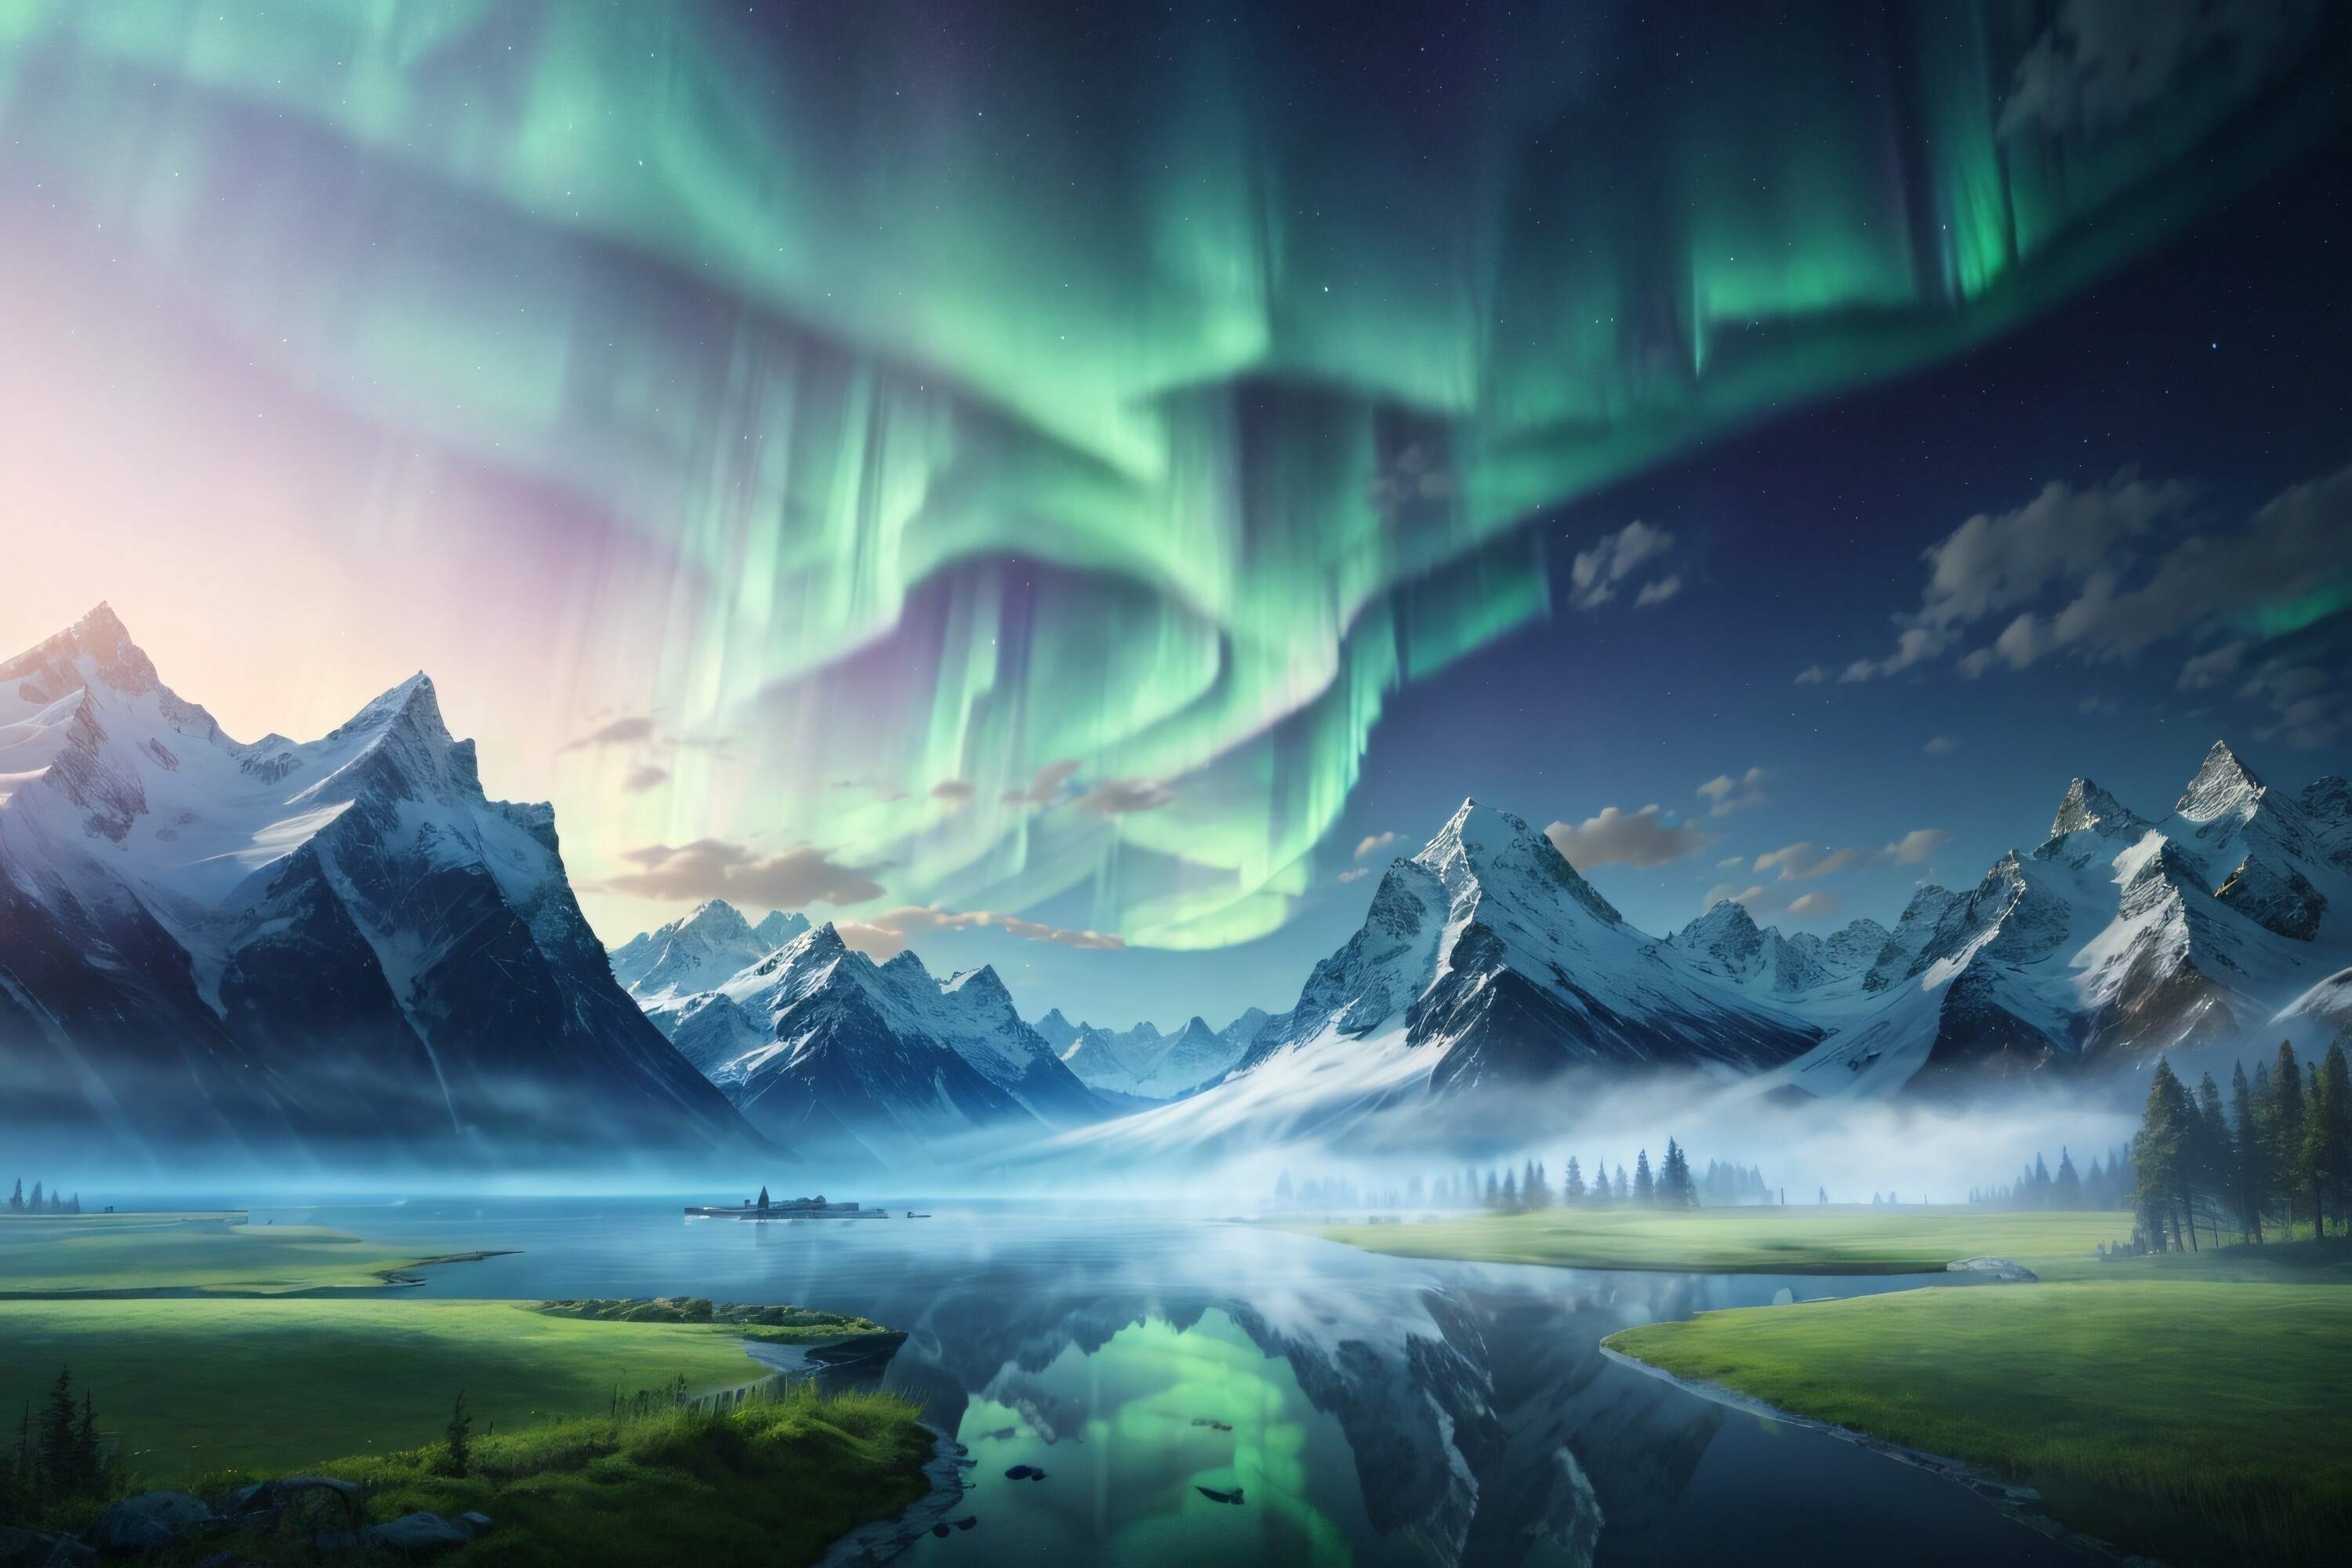 Aurora Sky Wallpaper Graphic by Forhadx5 · Creative Fabrica